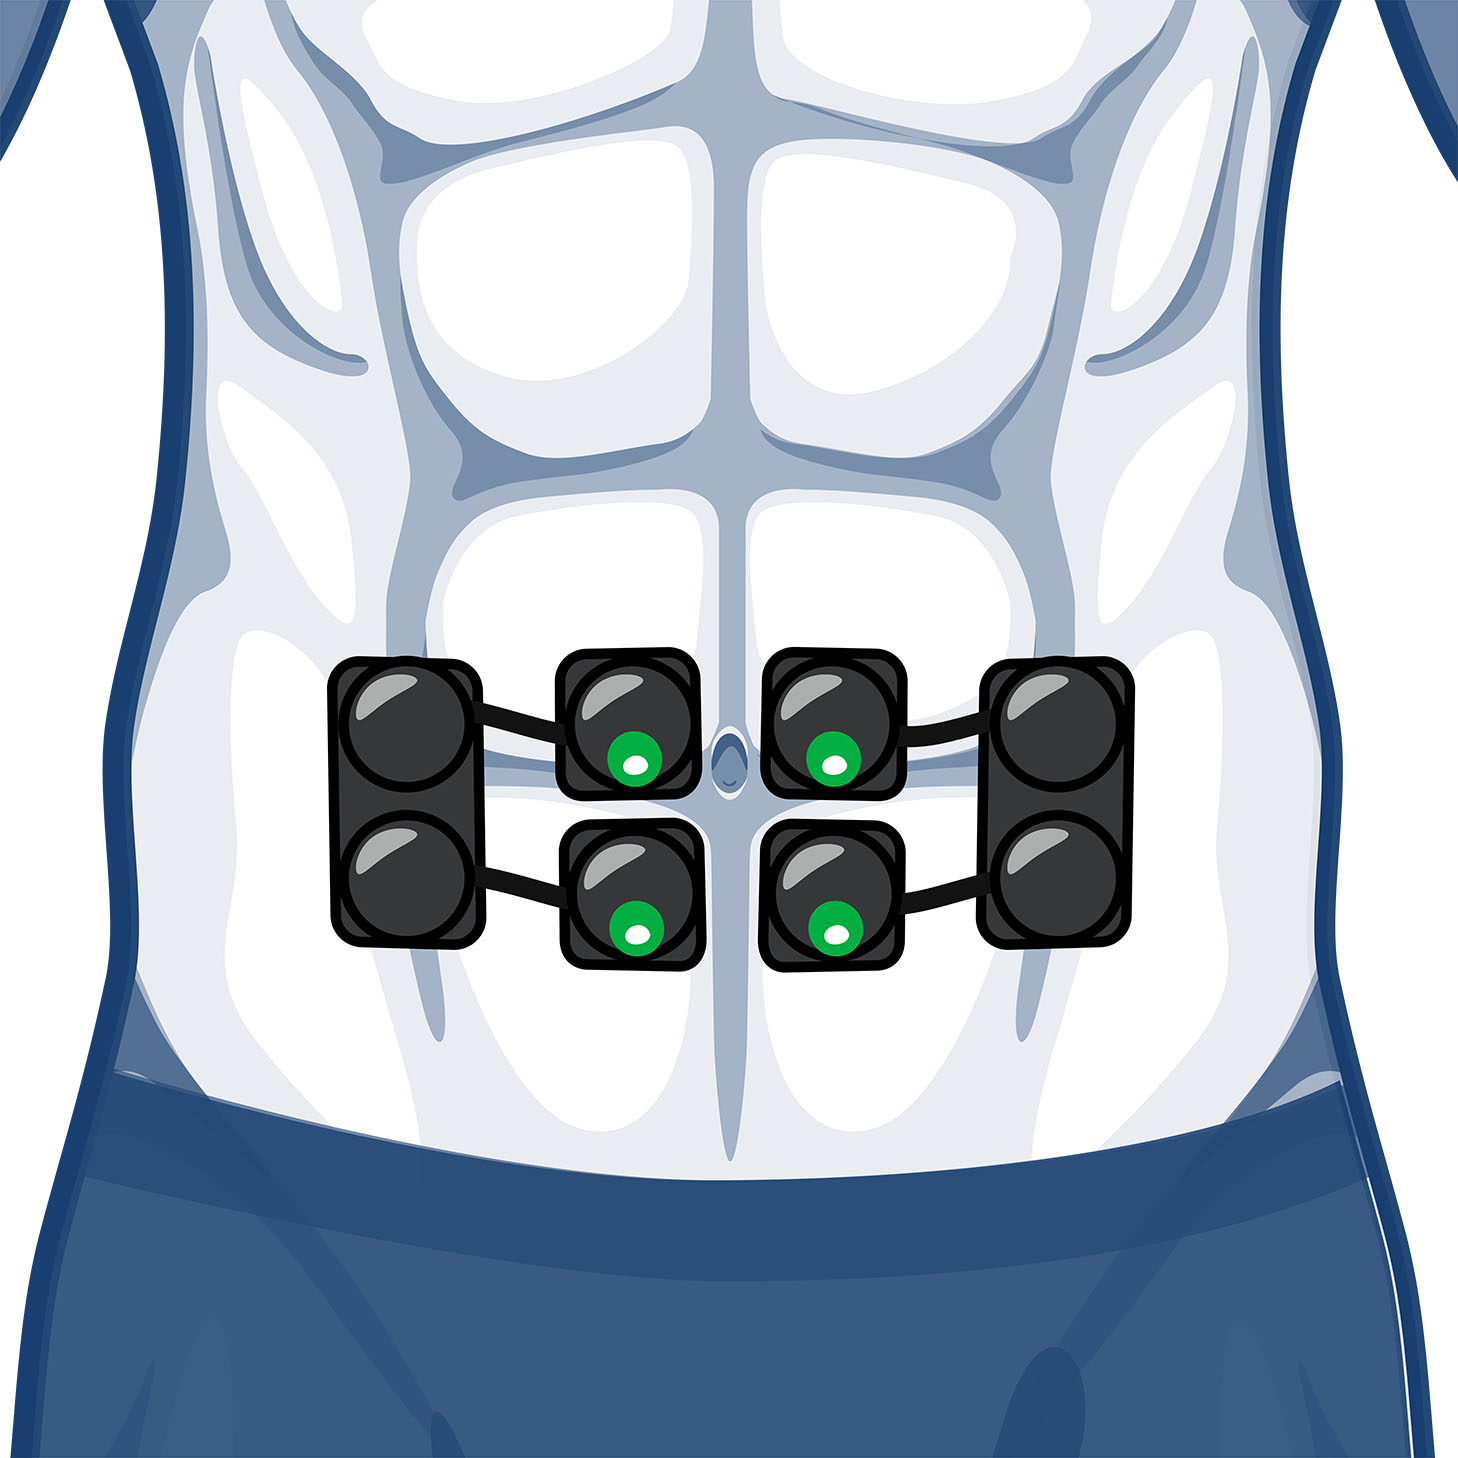 https://www.compex.com/media/wysiwyg/compex-eu/cms/electrode-placement/men/Wireless-Abs-1.jpg